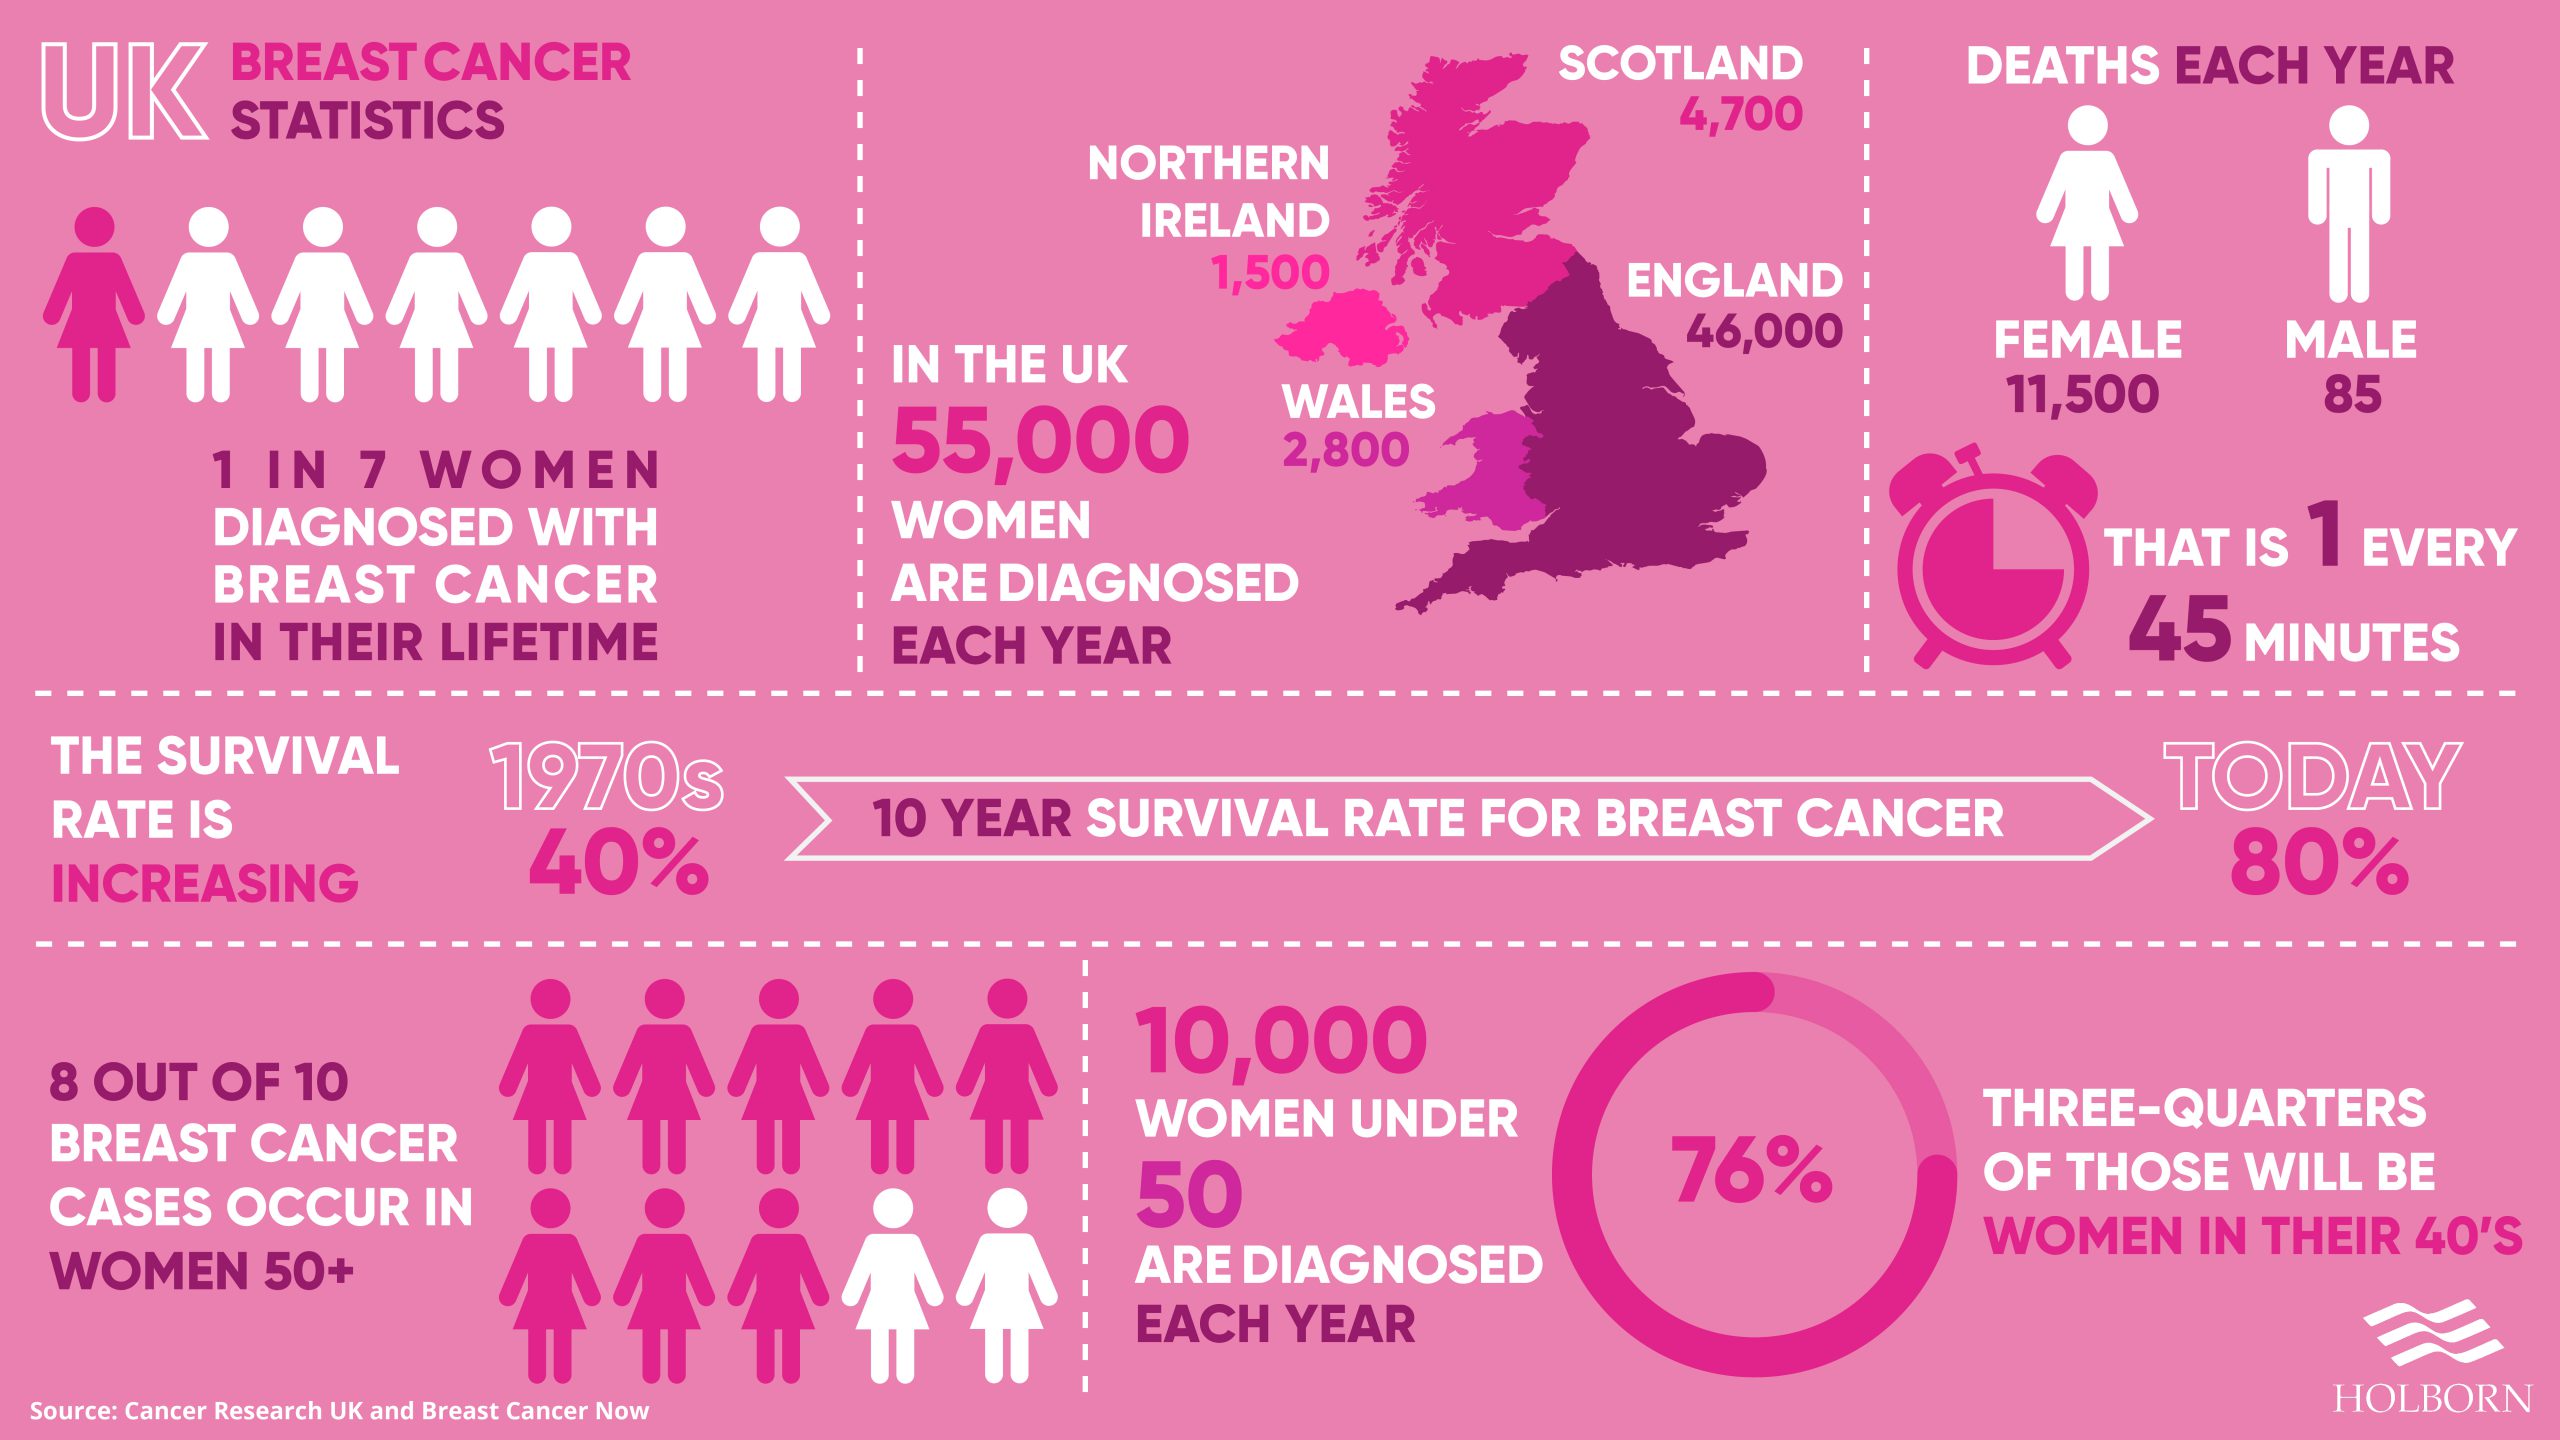 Breast cancer in the UK